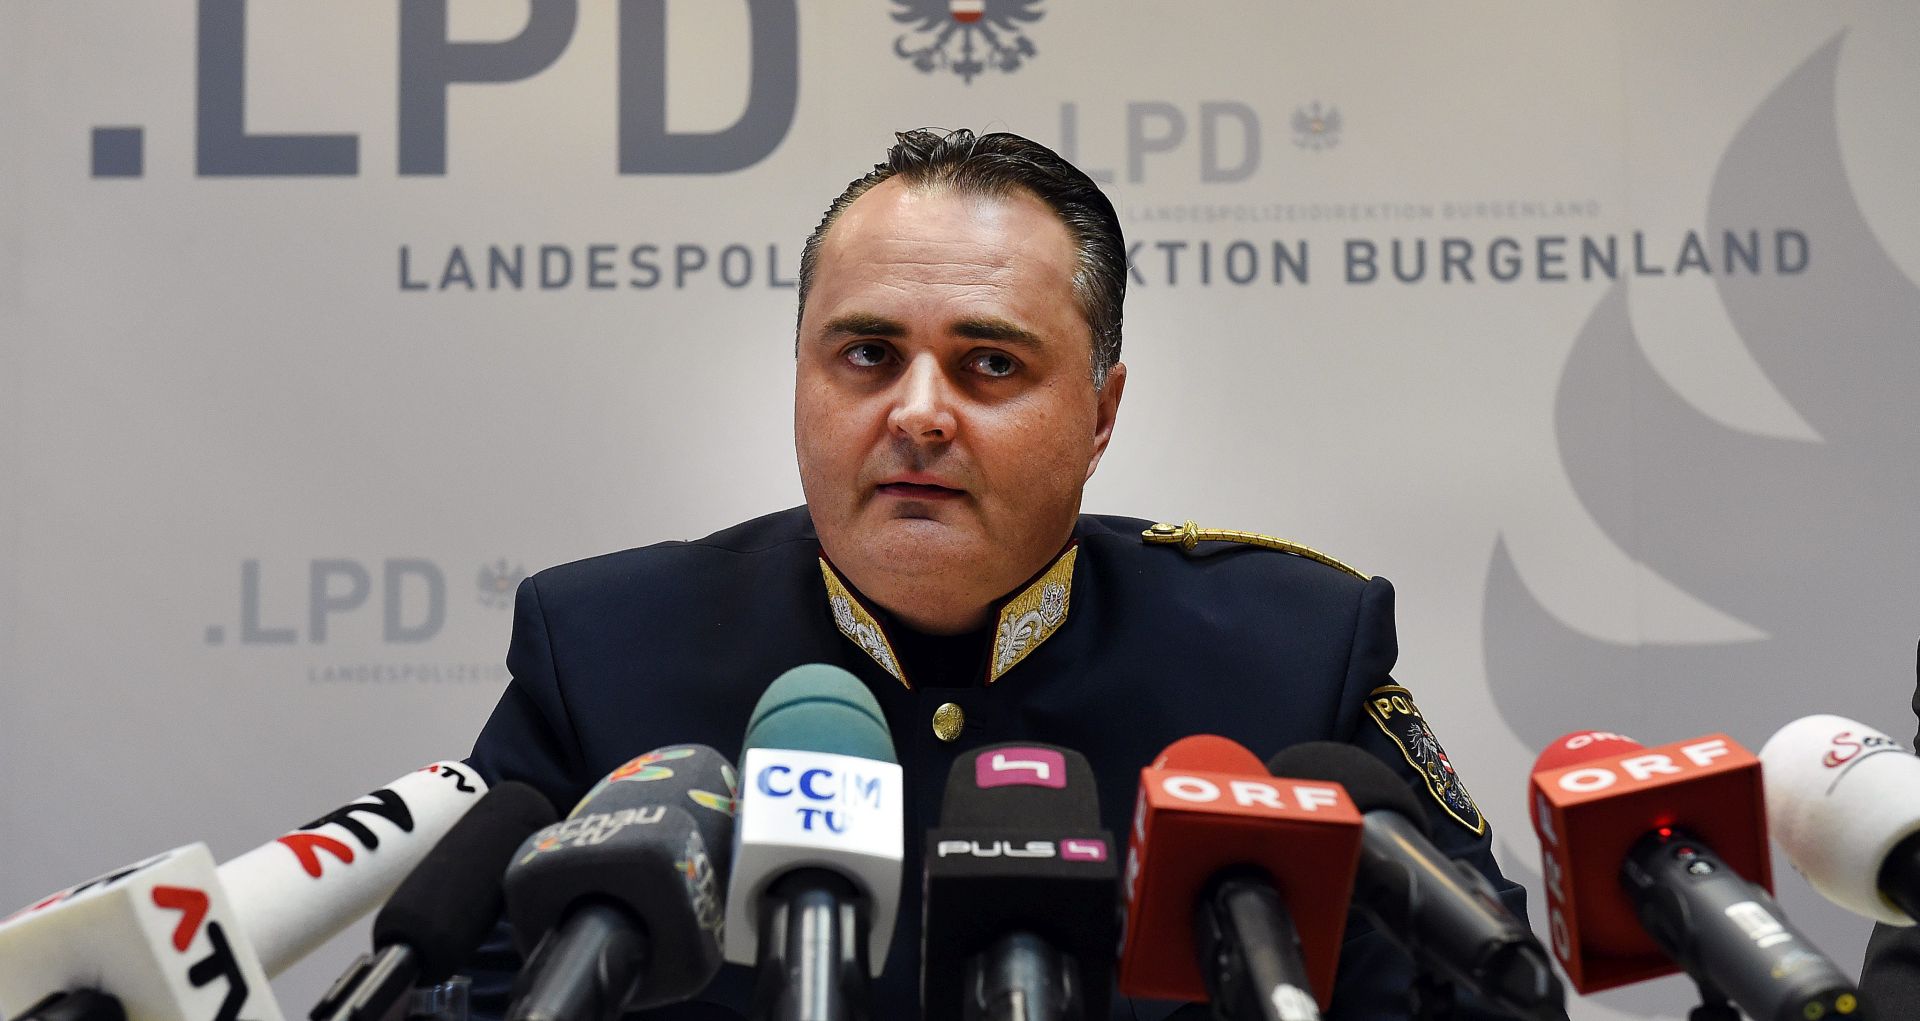 epa05042320 National Police Director Burgenland, Hanspeter Doskozil  talks to the media during the press conference about the case of the 71 refugees that were found dead in van on the A4 highway in Eisenstadt, Austria, 26 November 2015.  On 27 August 2015 the bodies of 59 mens, eight womans and four children were found inside a van in the A4 highway. The cause of death was suffocation.  EPA/HERBERT P. OCZERET